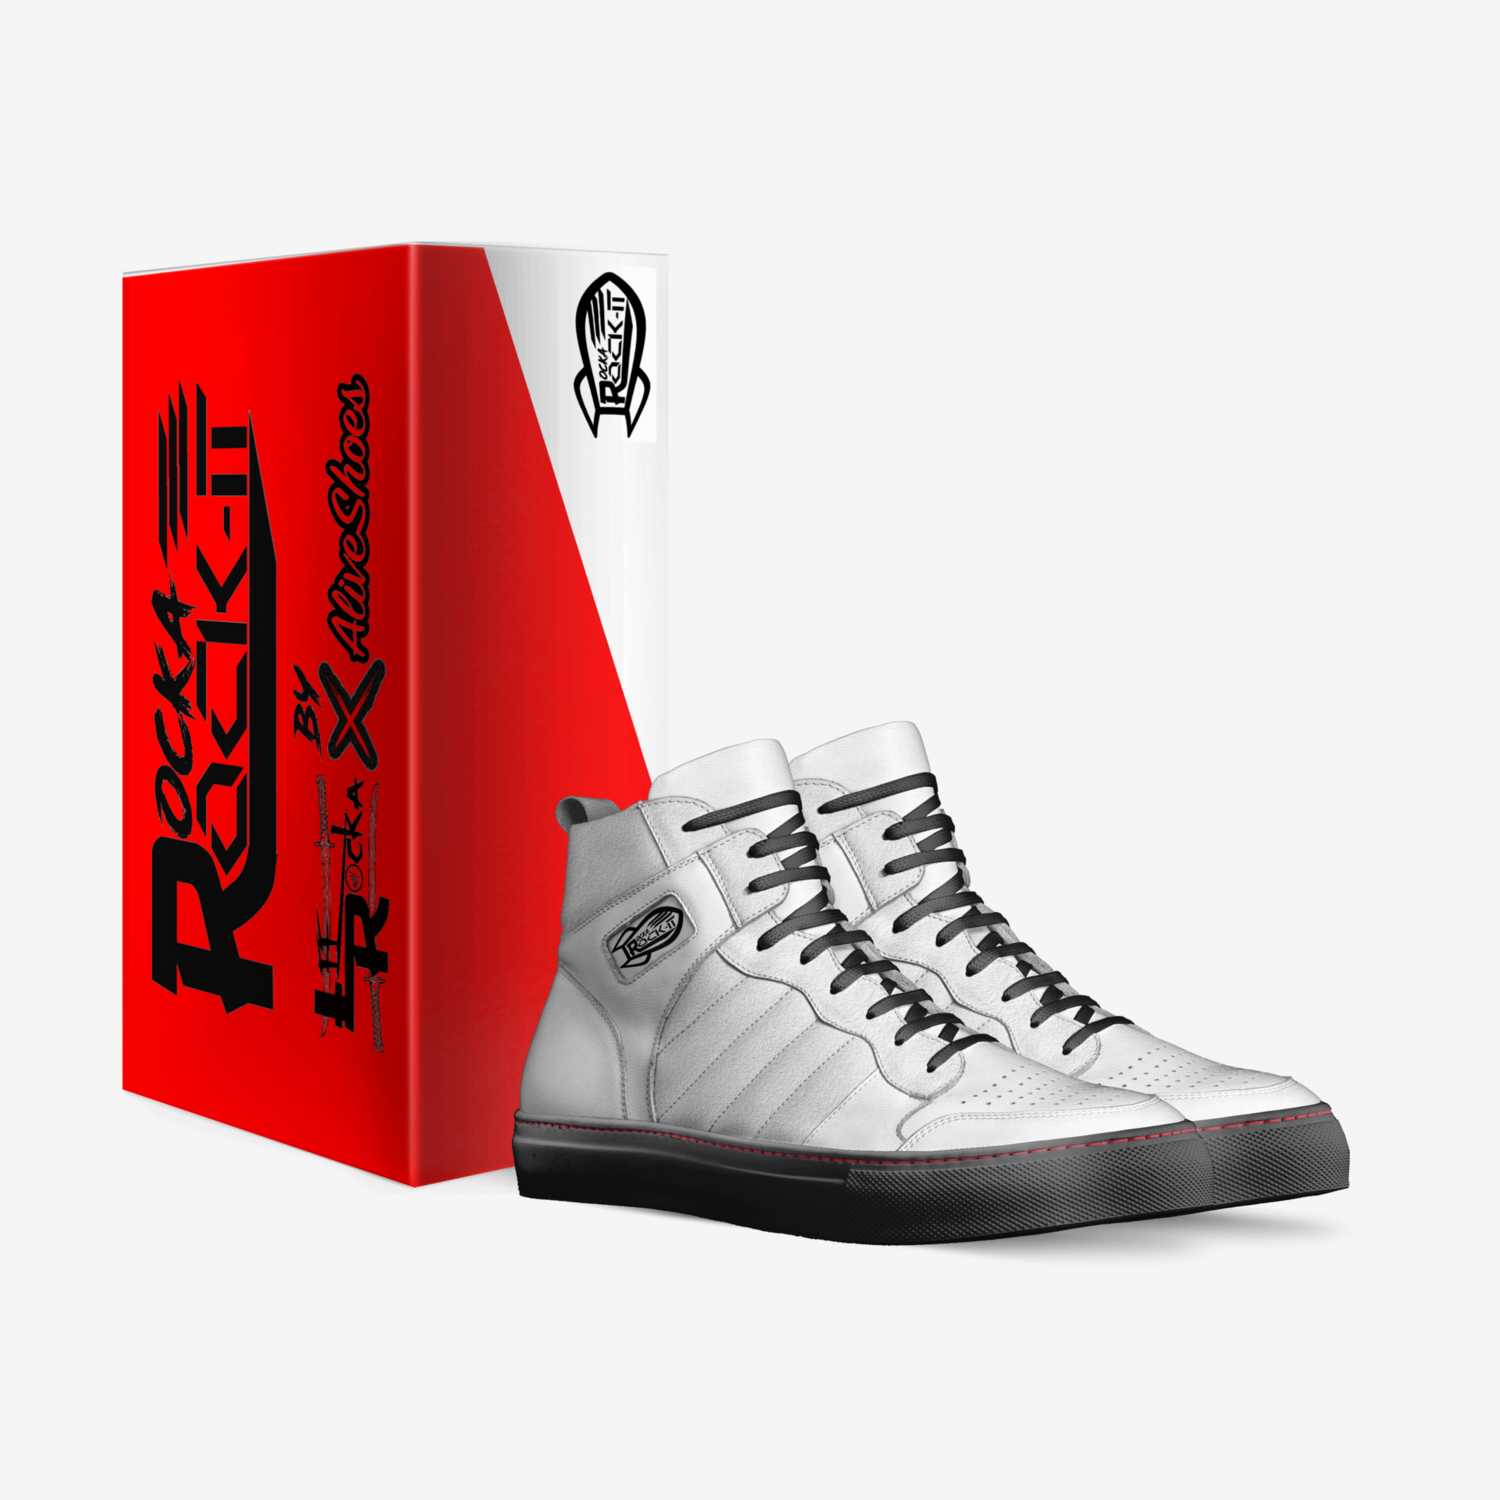 Rock-It custom made in Italy shoes by Danial Lee | Box view